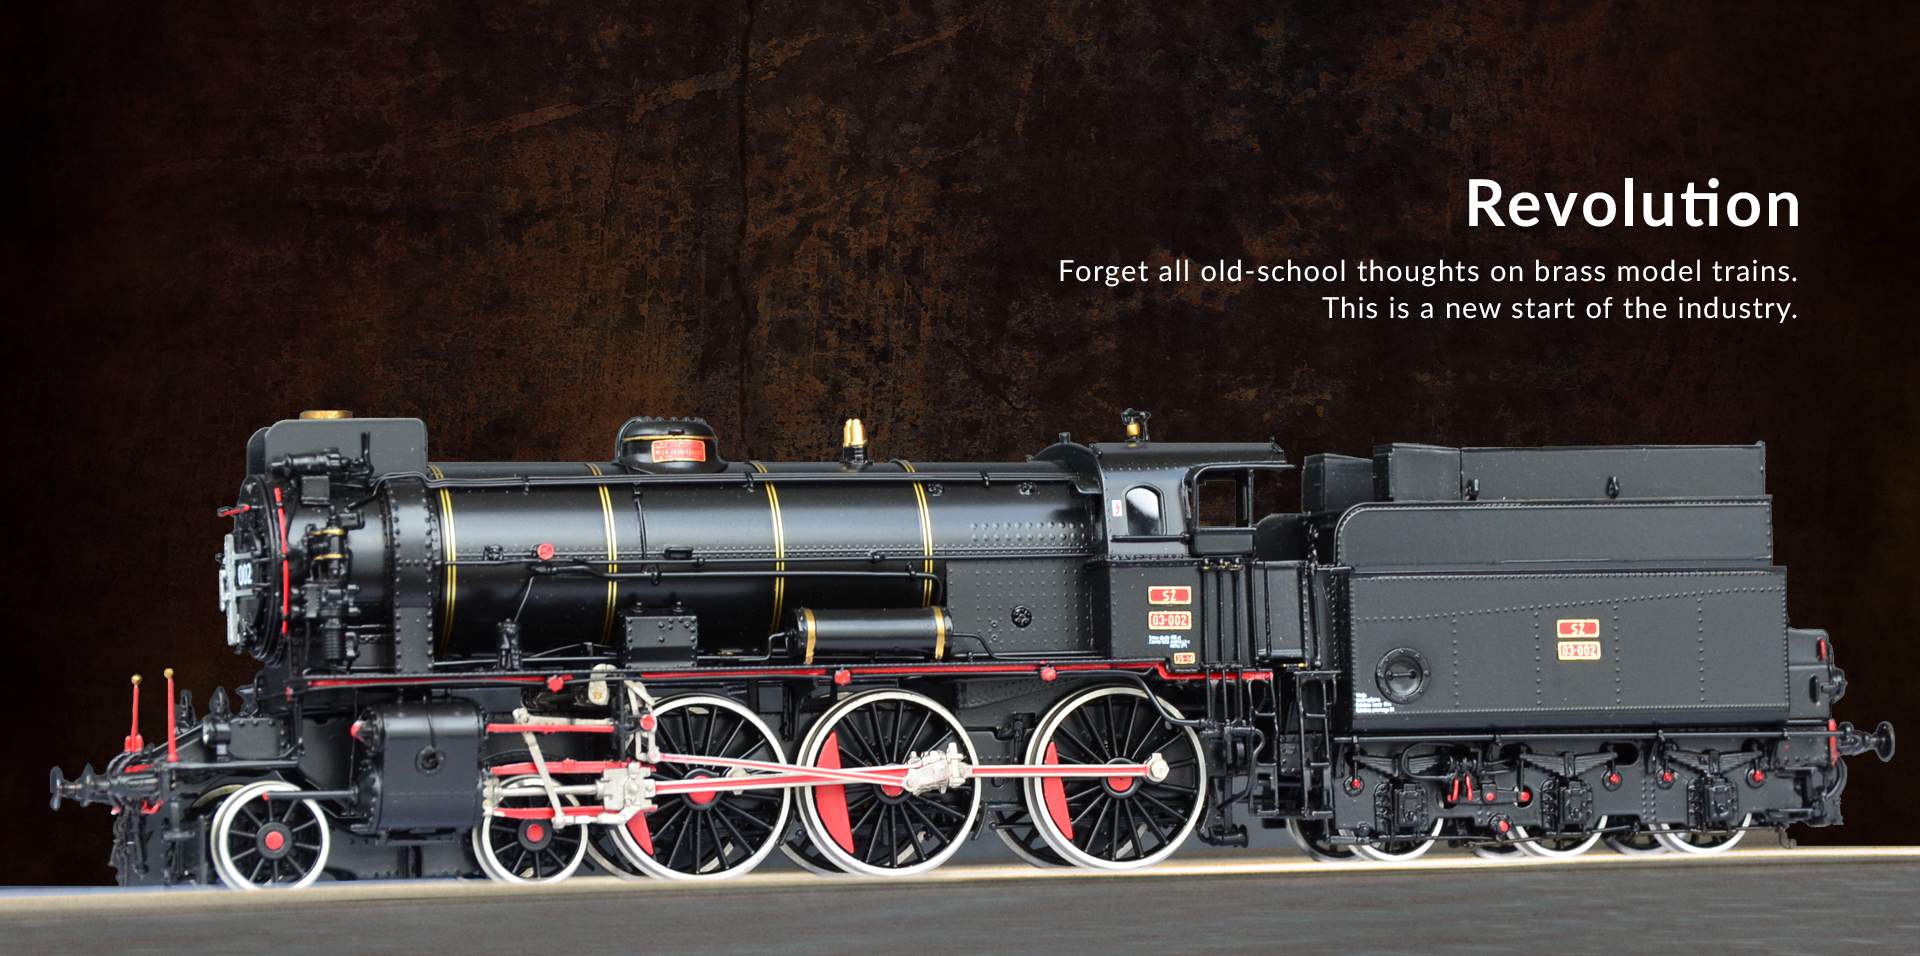 Revolution - Forget all old school thoughts on brass model trains. This is a new start of the industry.